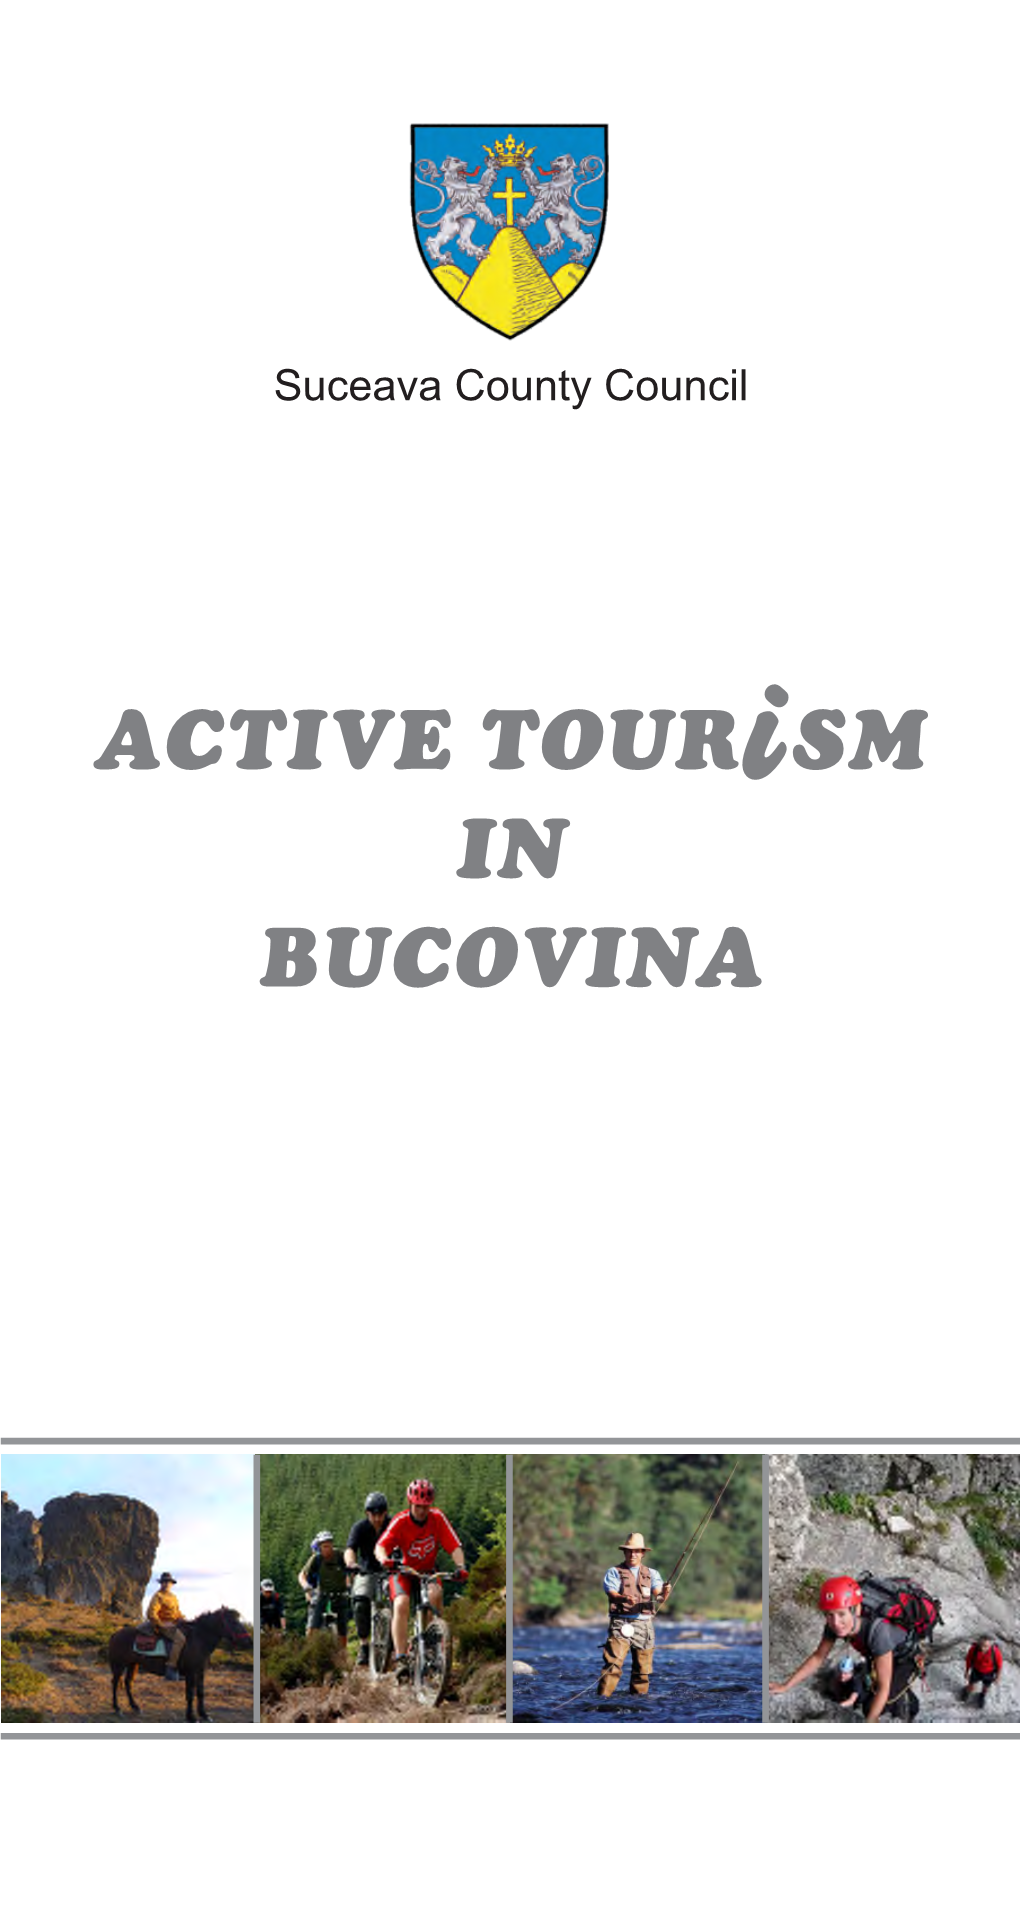 Active Tour Sm in Bucovina Active Tourism in Bucovina